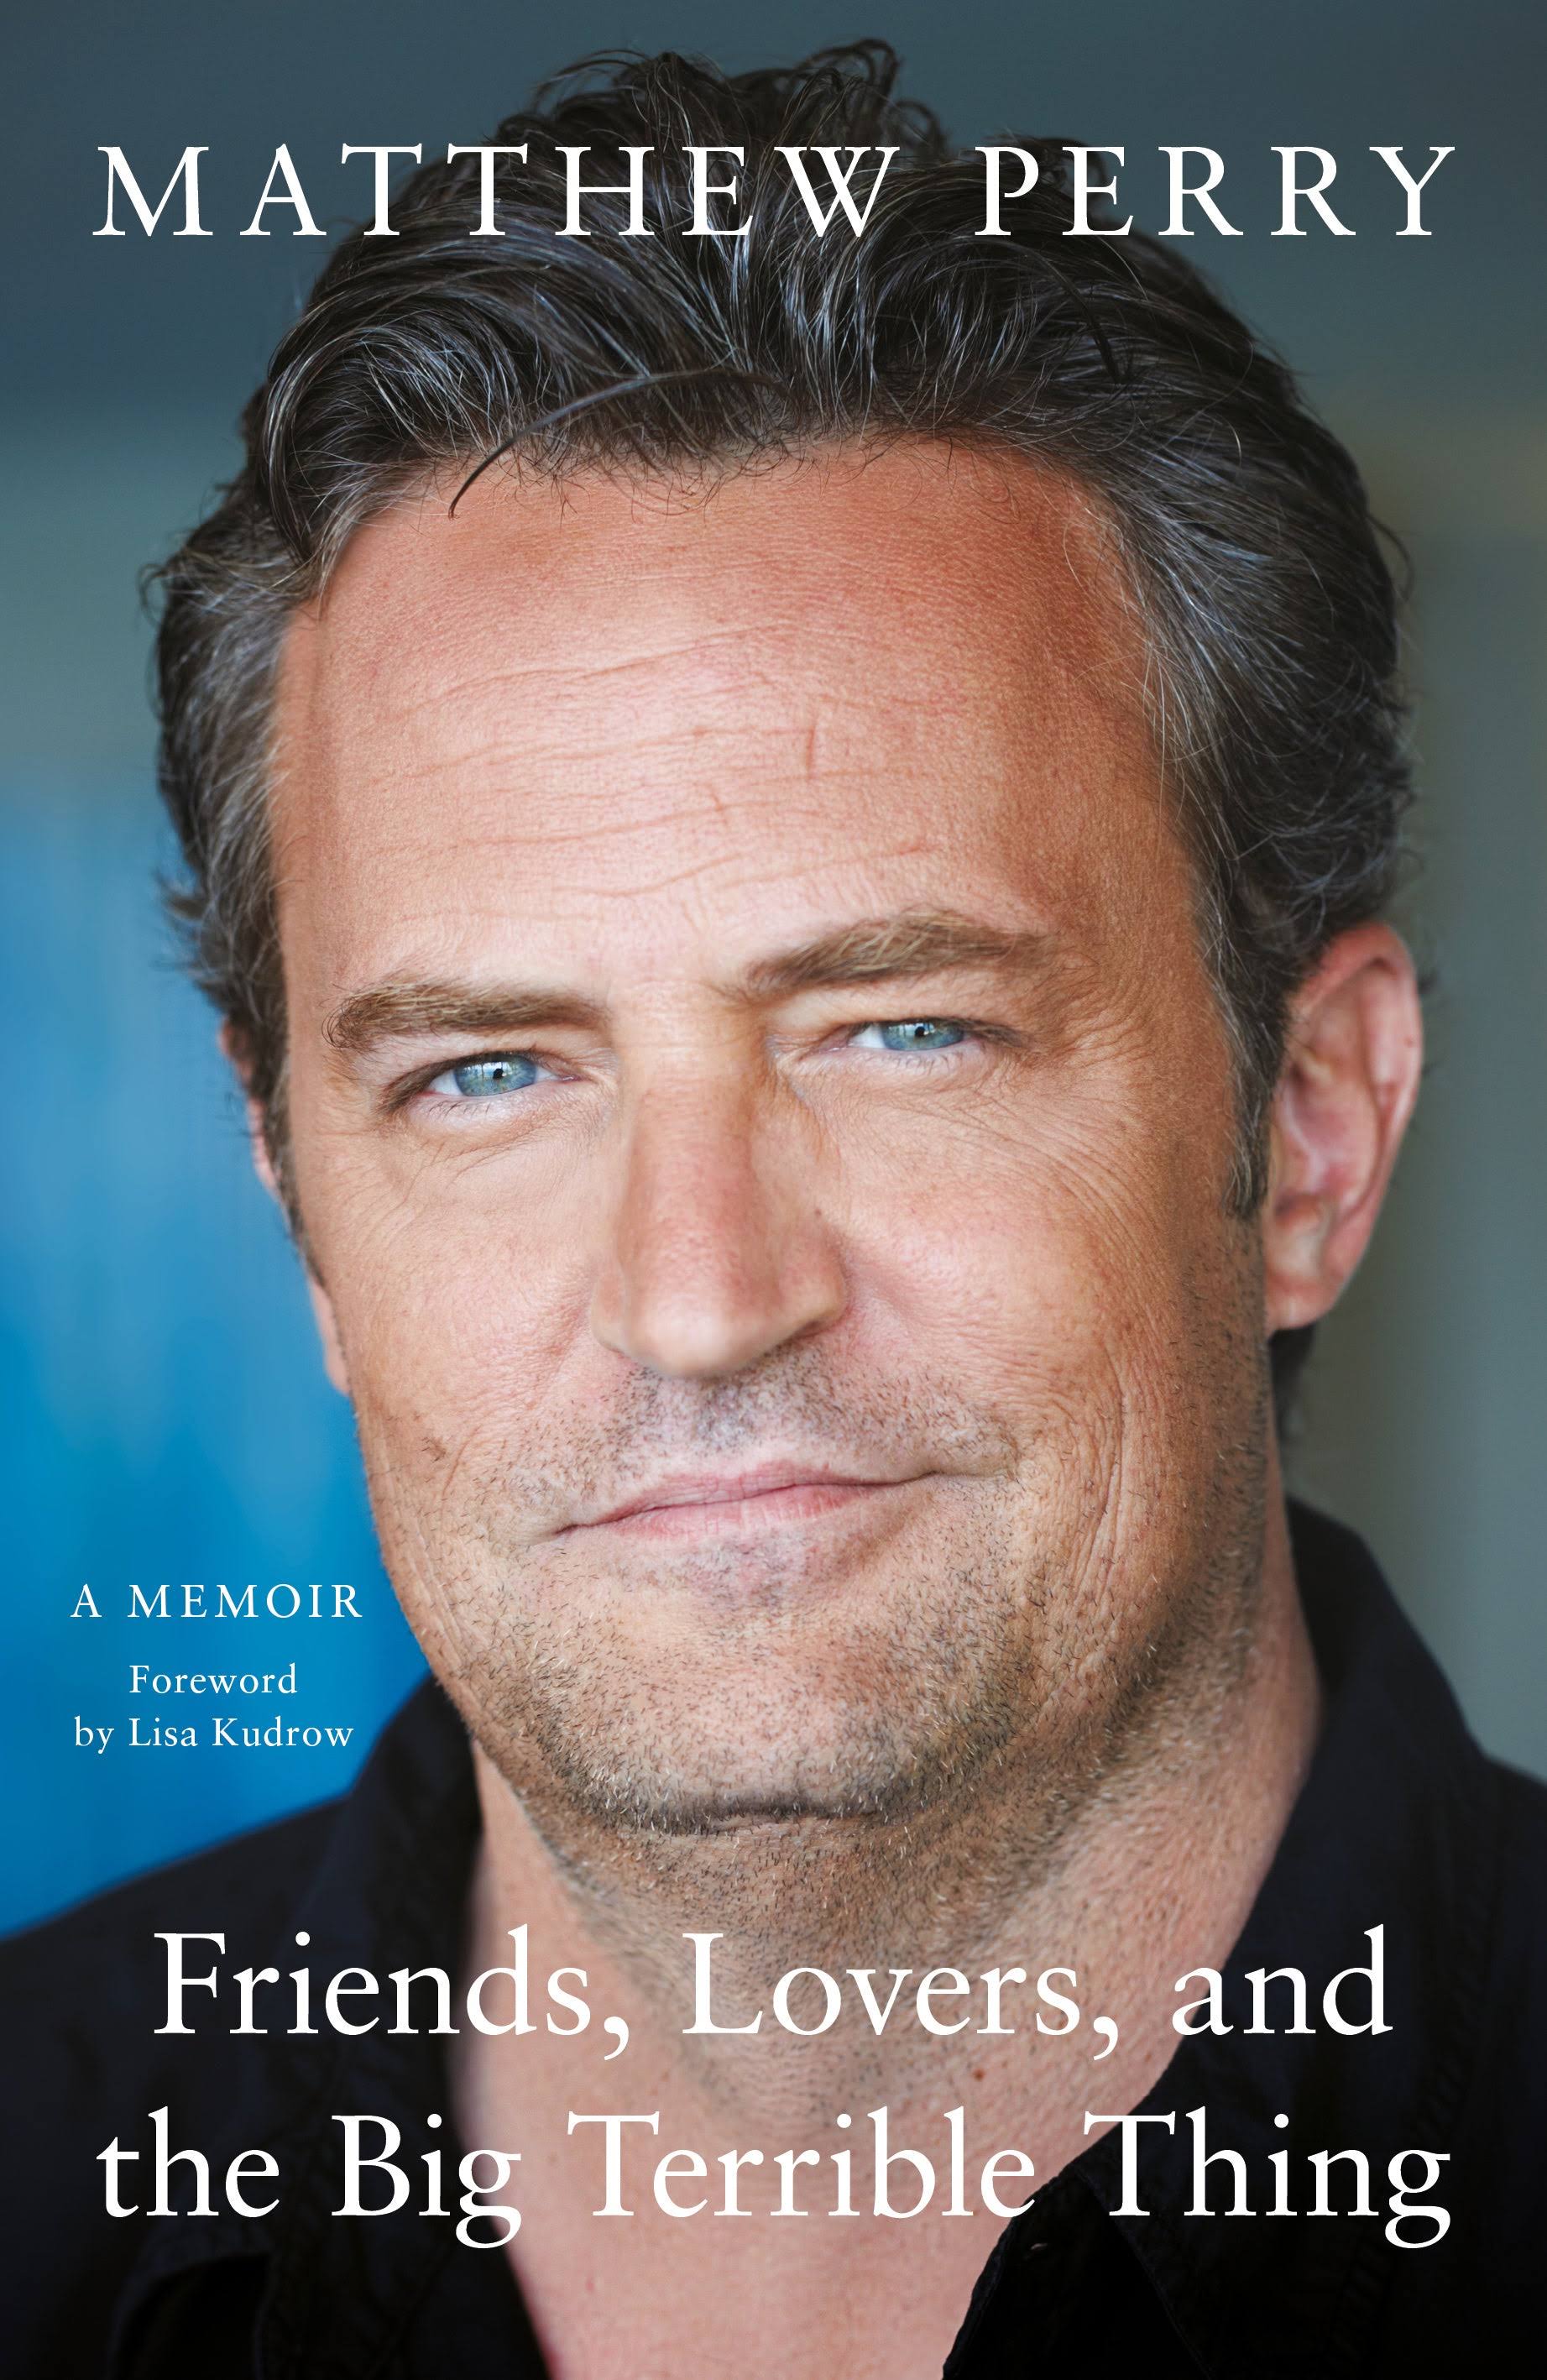 Friends, Lovers and the Big Terrible Thing by Matthew Perry